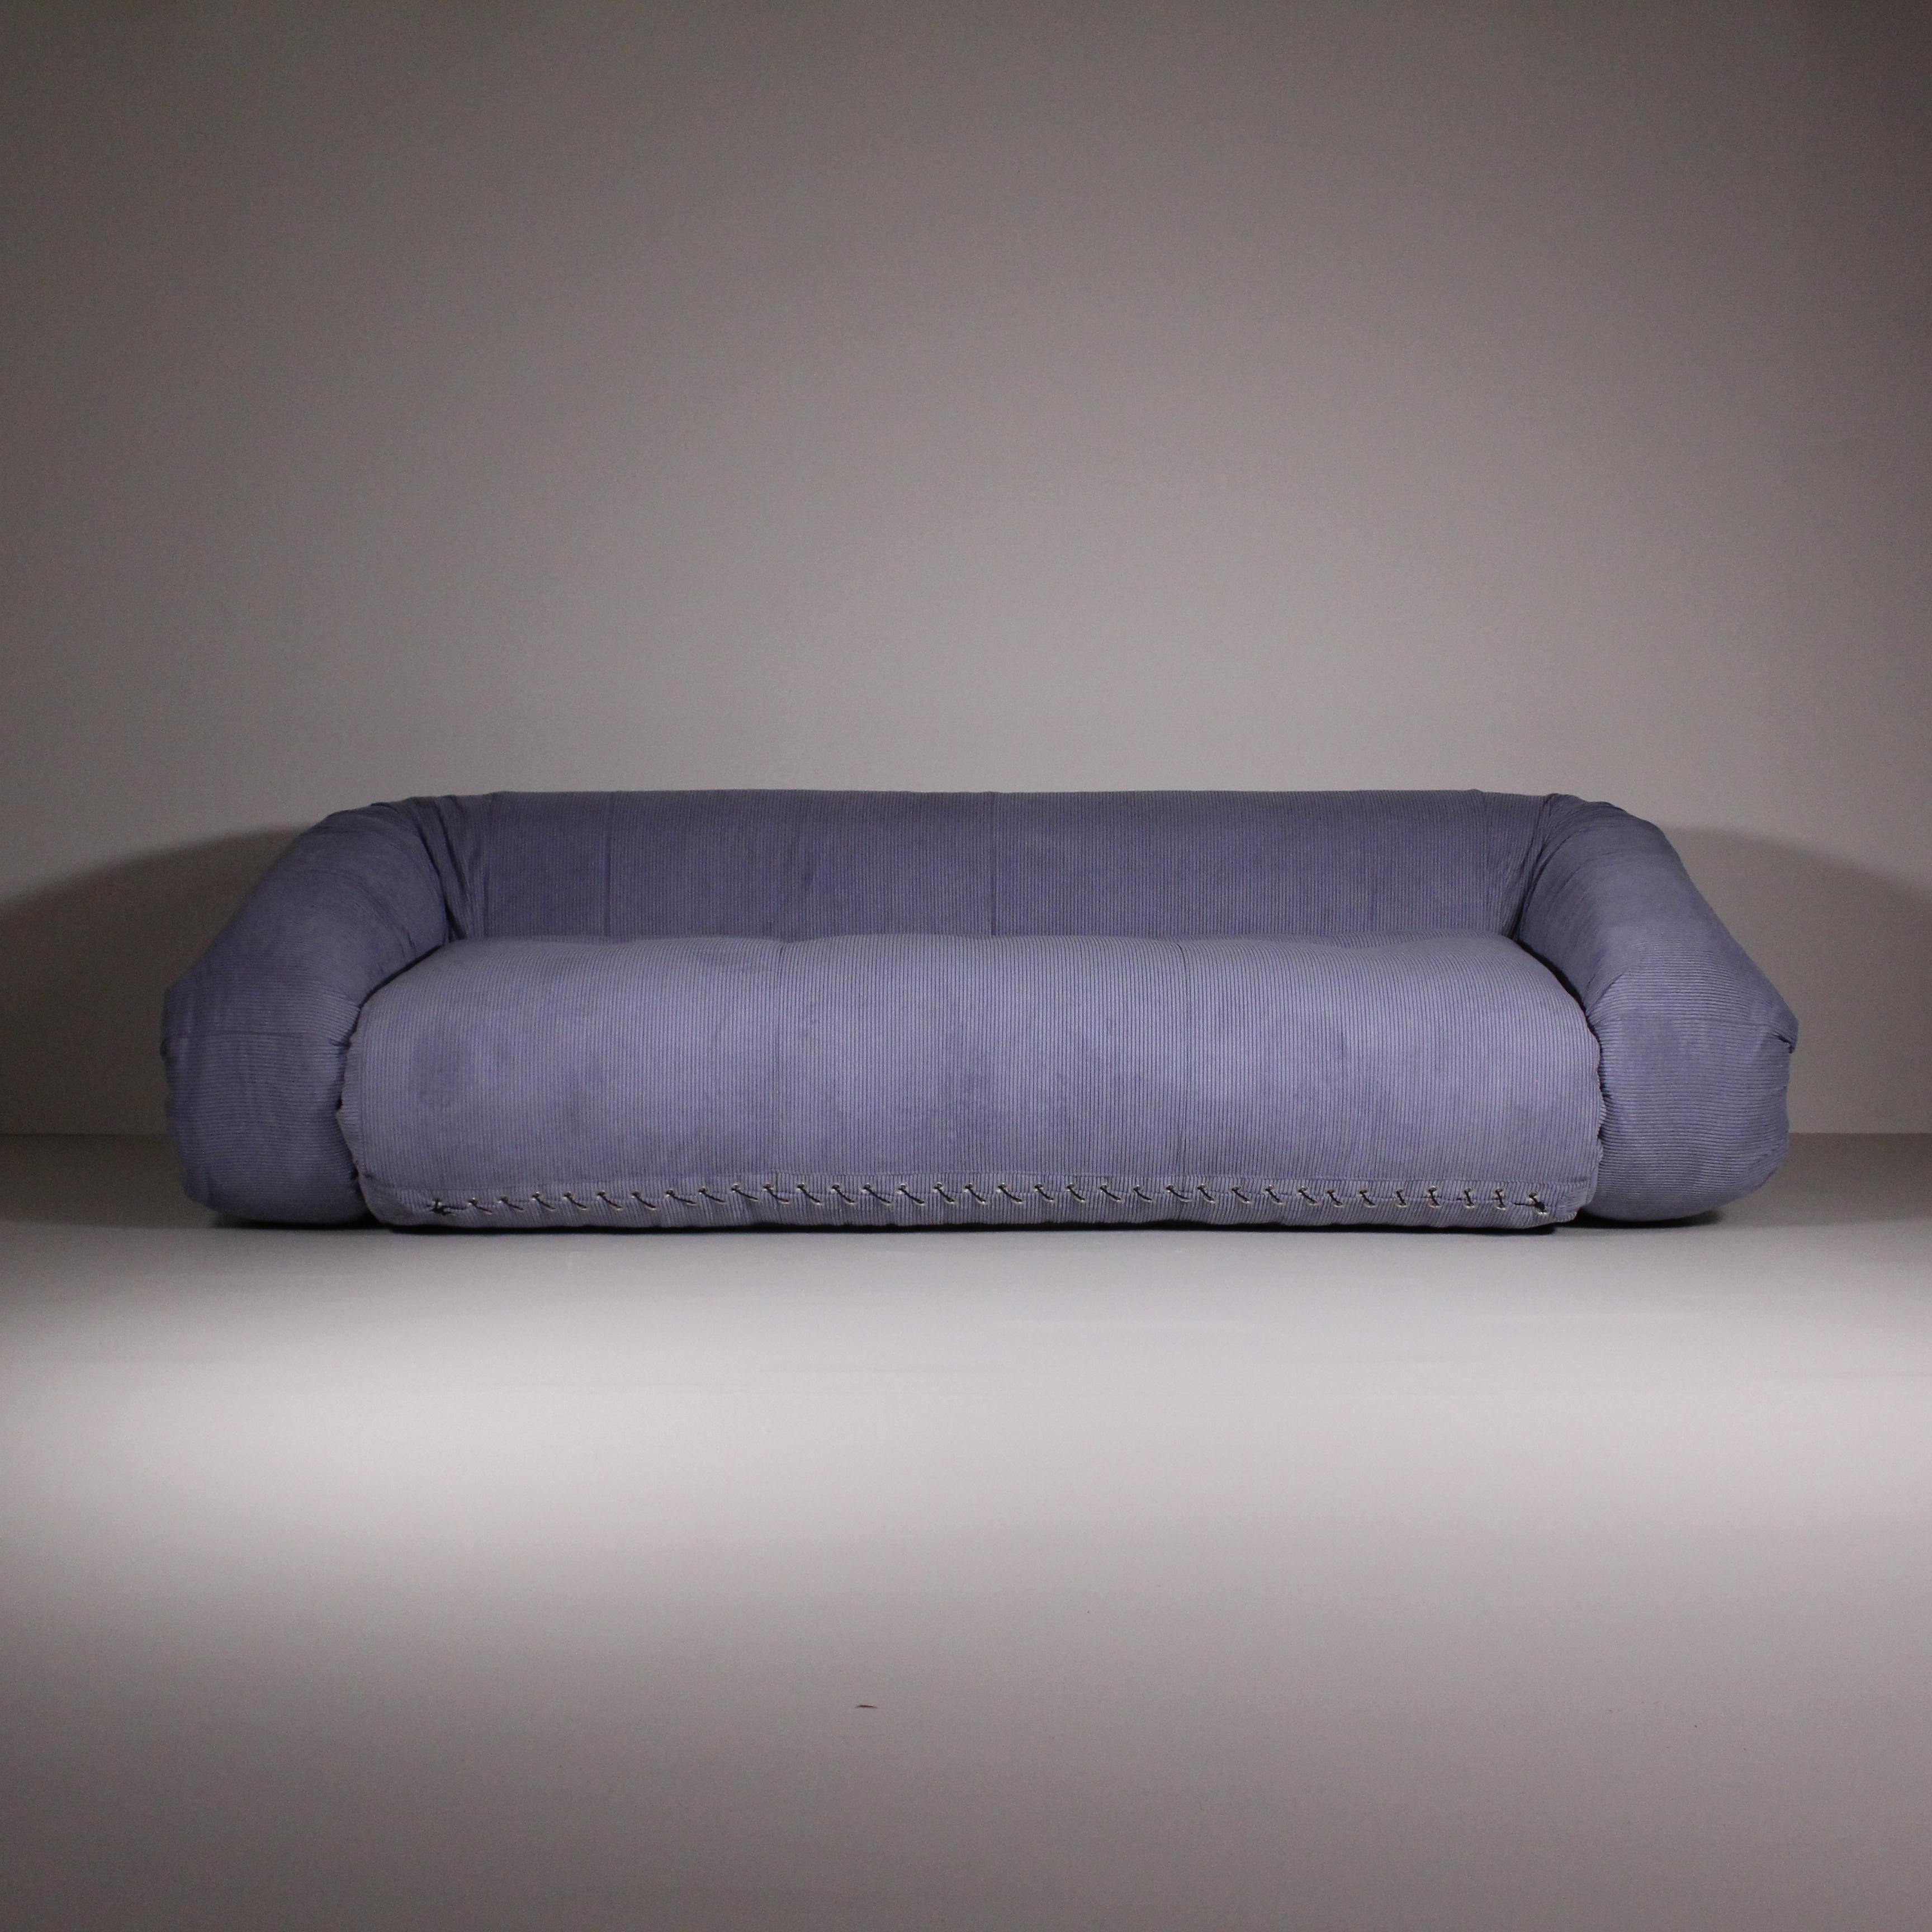 Anfibio sofa, Alessandro Becchi, Giovannetti, reupholstered In Excellent Condition For Sale In Milano, Lombardia